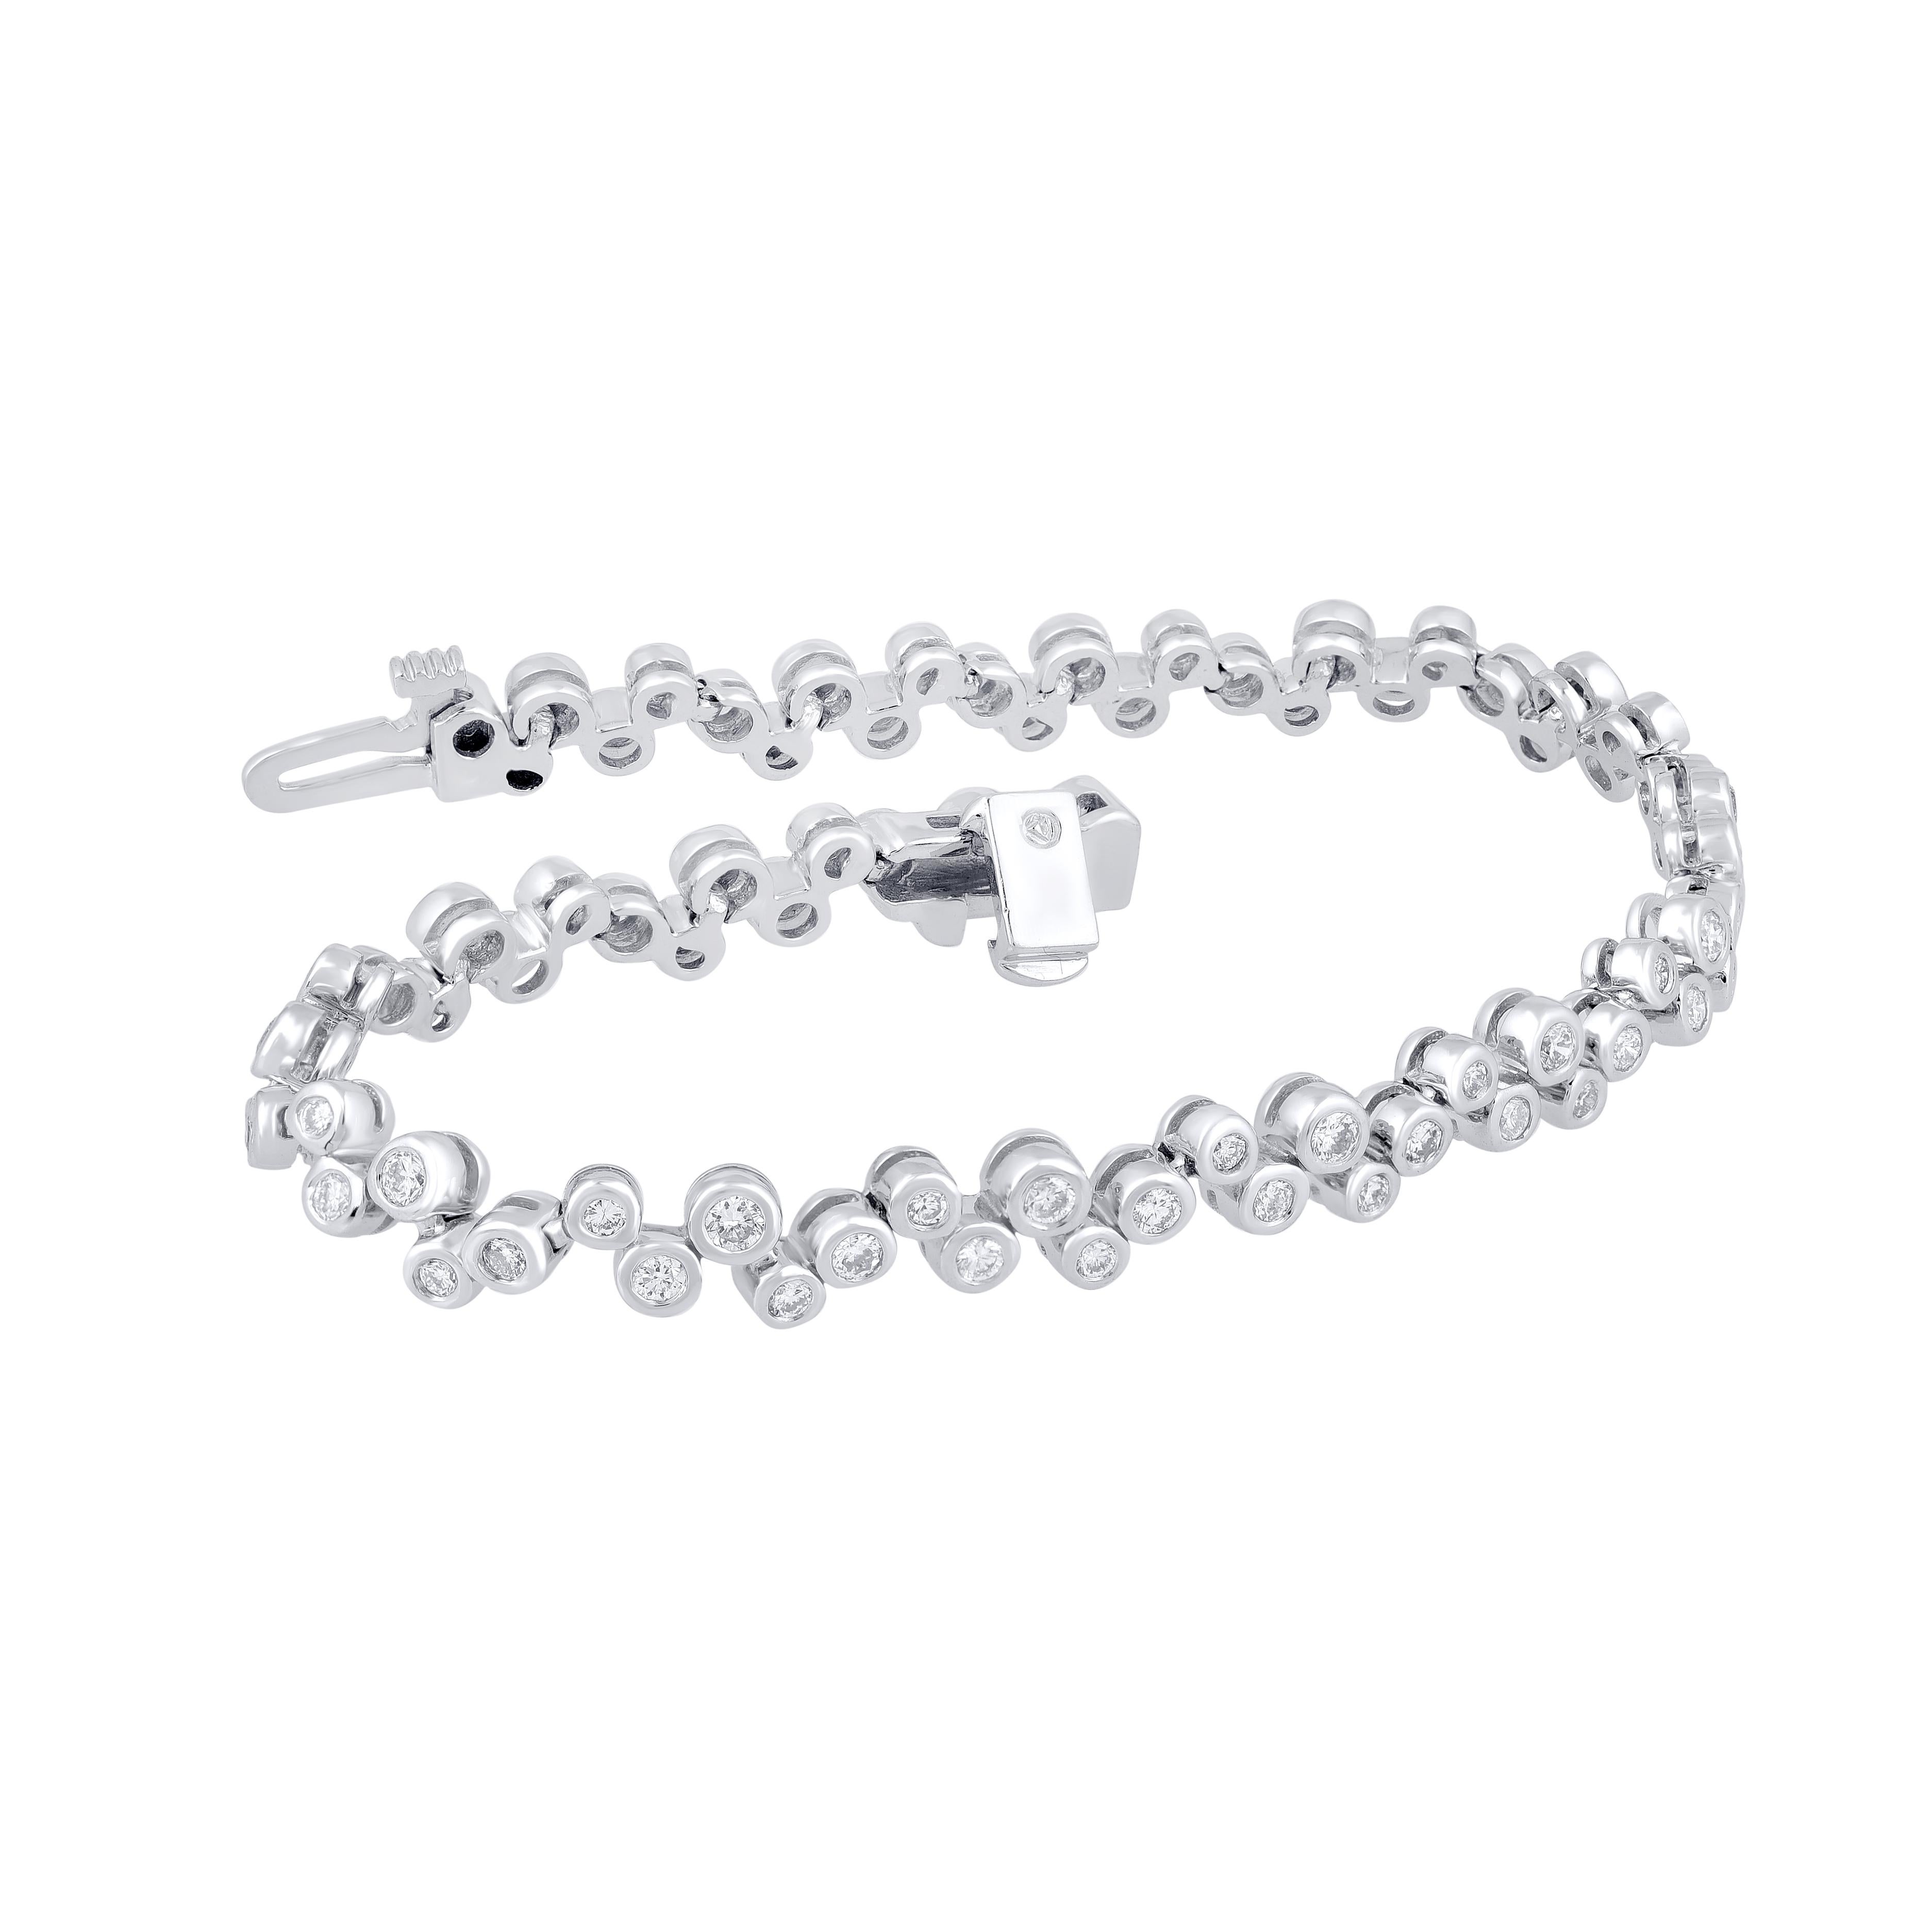 An elegantly designed designer bracelet for women, studded with 80 diamonds in Bezel setting The bracelet is beautifully crafted in 14 Kt white gold. Diamond details are graded GH Color, I1 Clarity. It secures firmly with Bracelet Catch. This